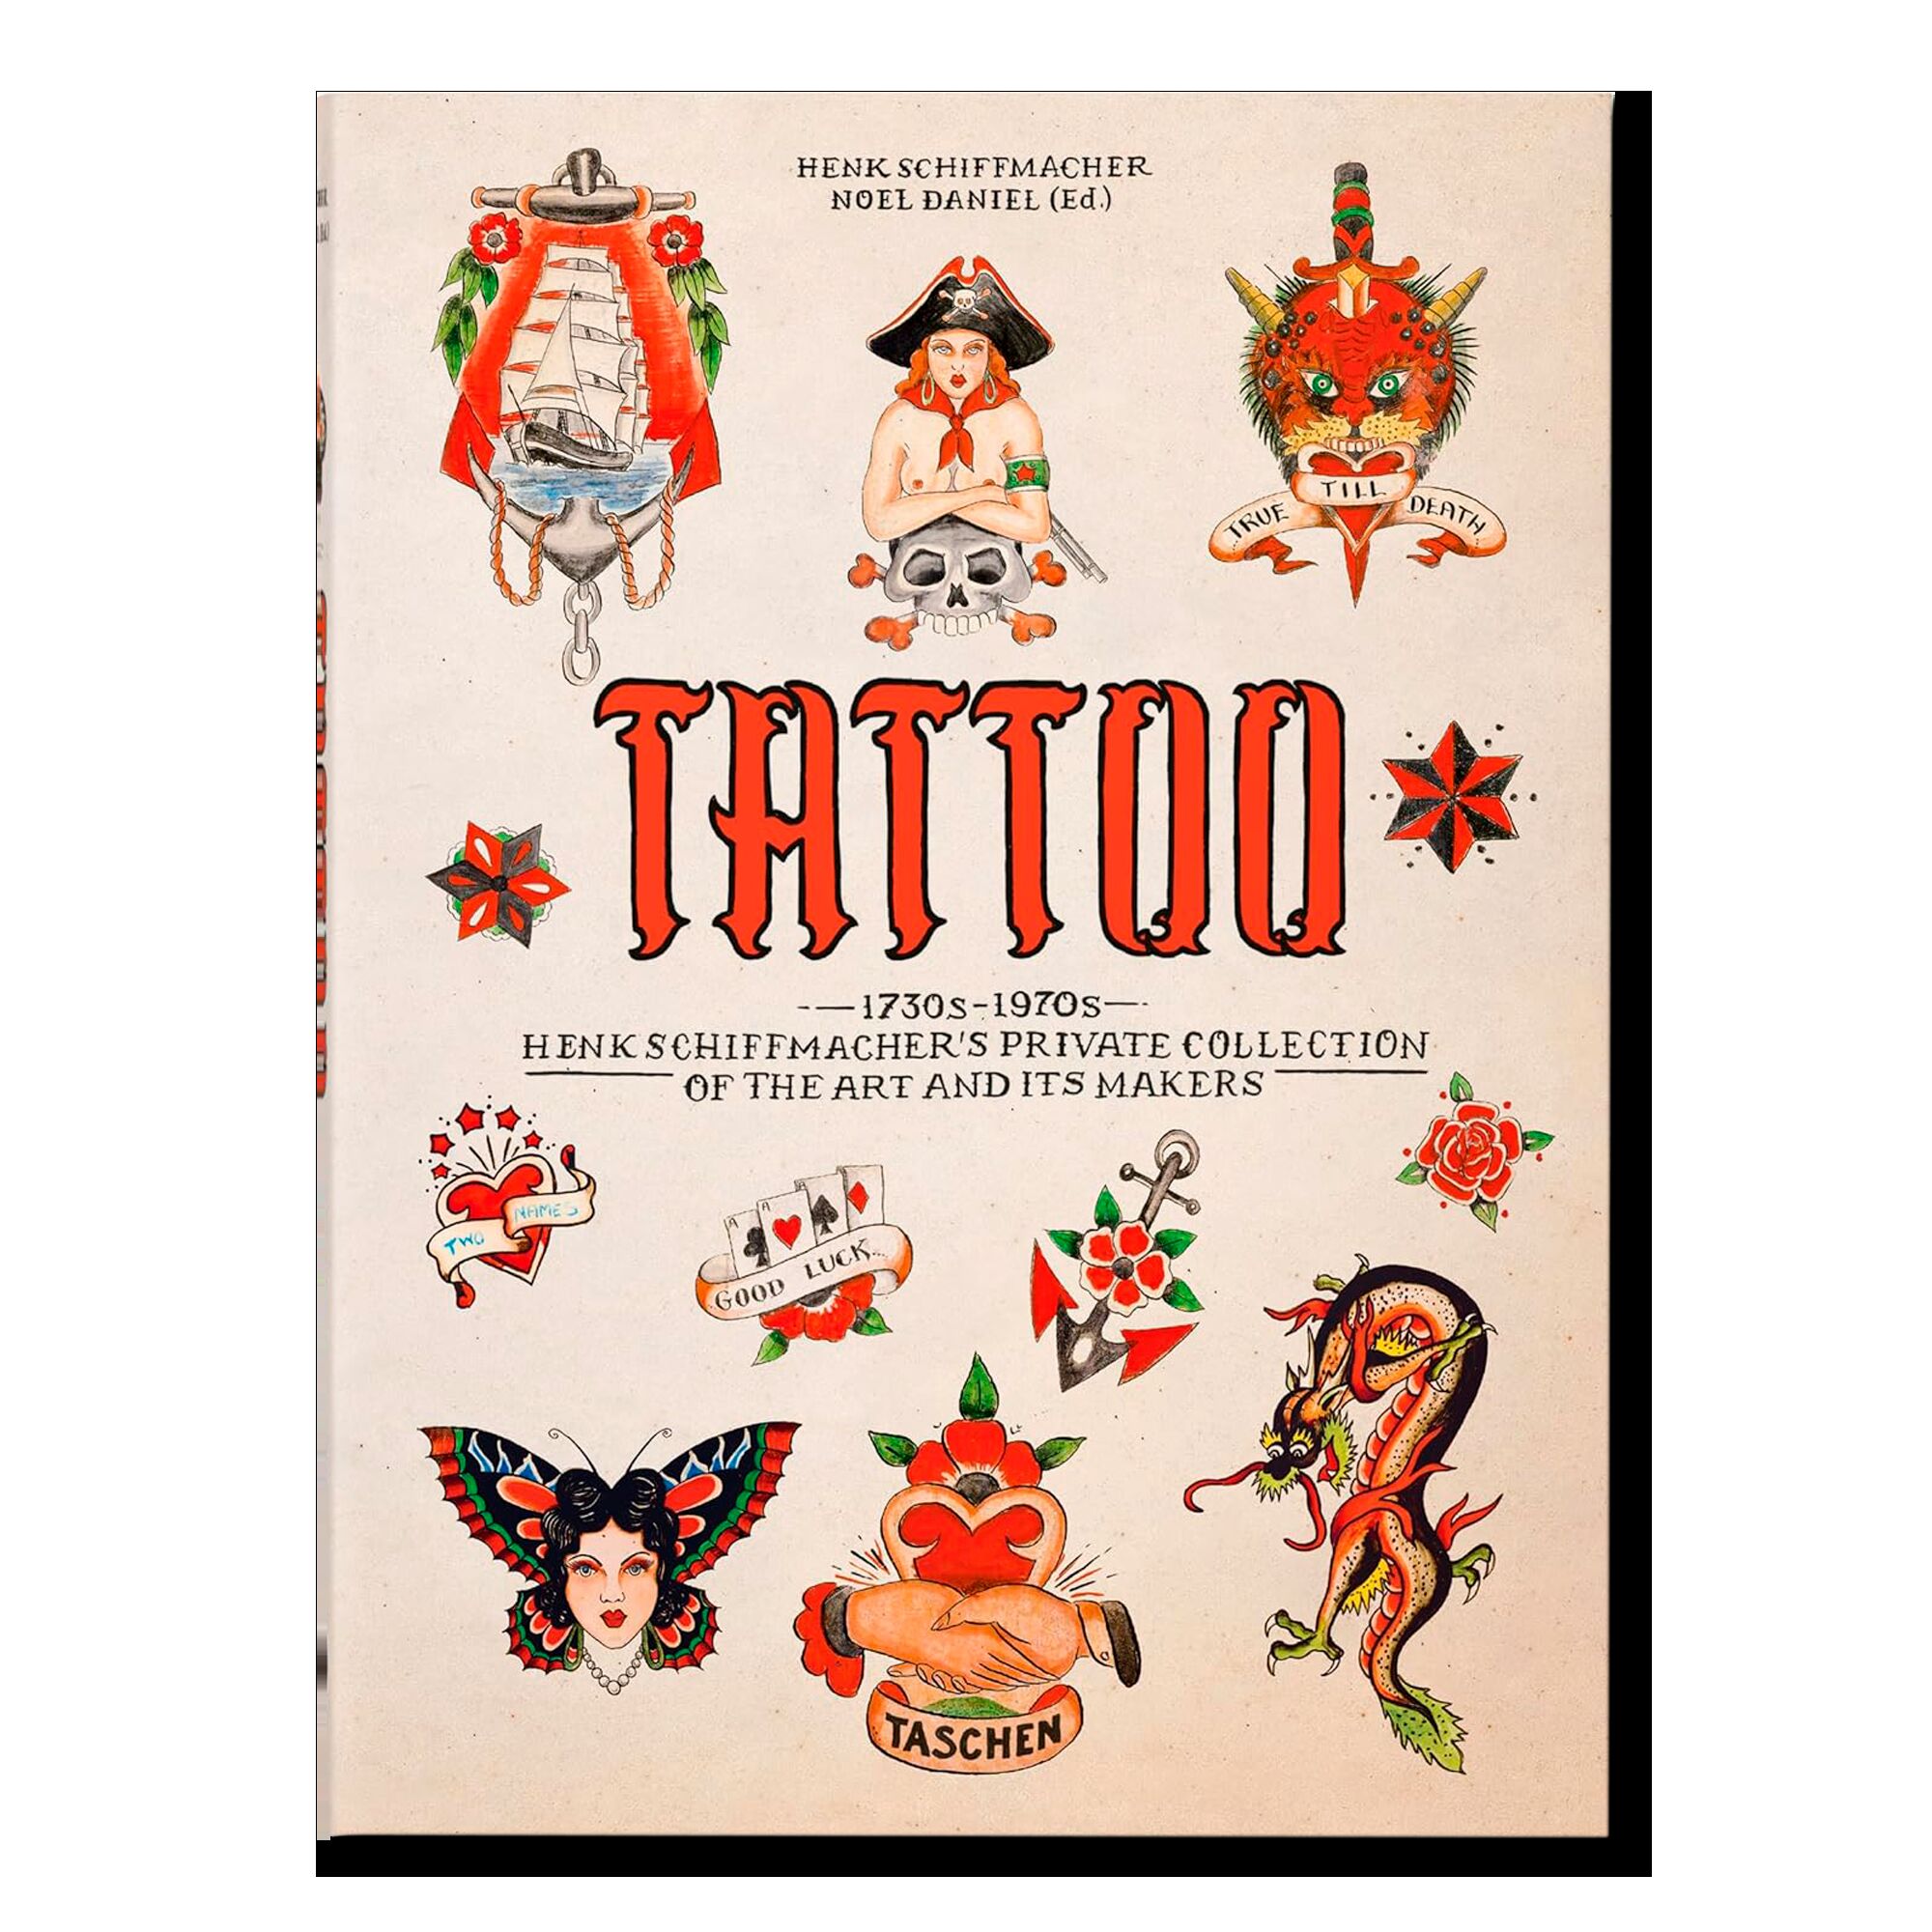 Tattoo: 1730s-1970s; Henk Schiffmacher’s Private Collection of the Art and Its Makers (40th Anniversary Edition)